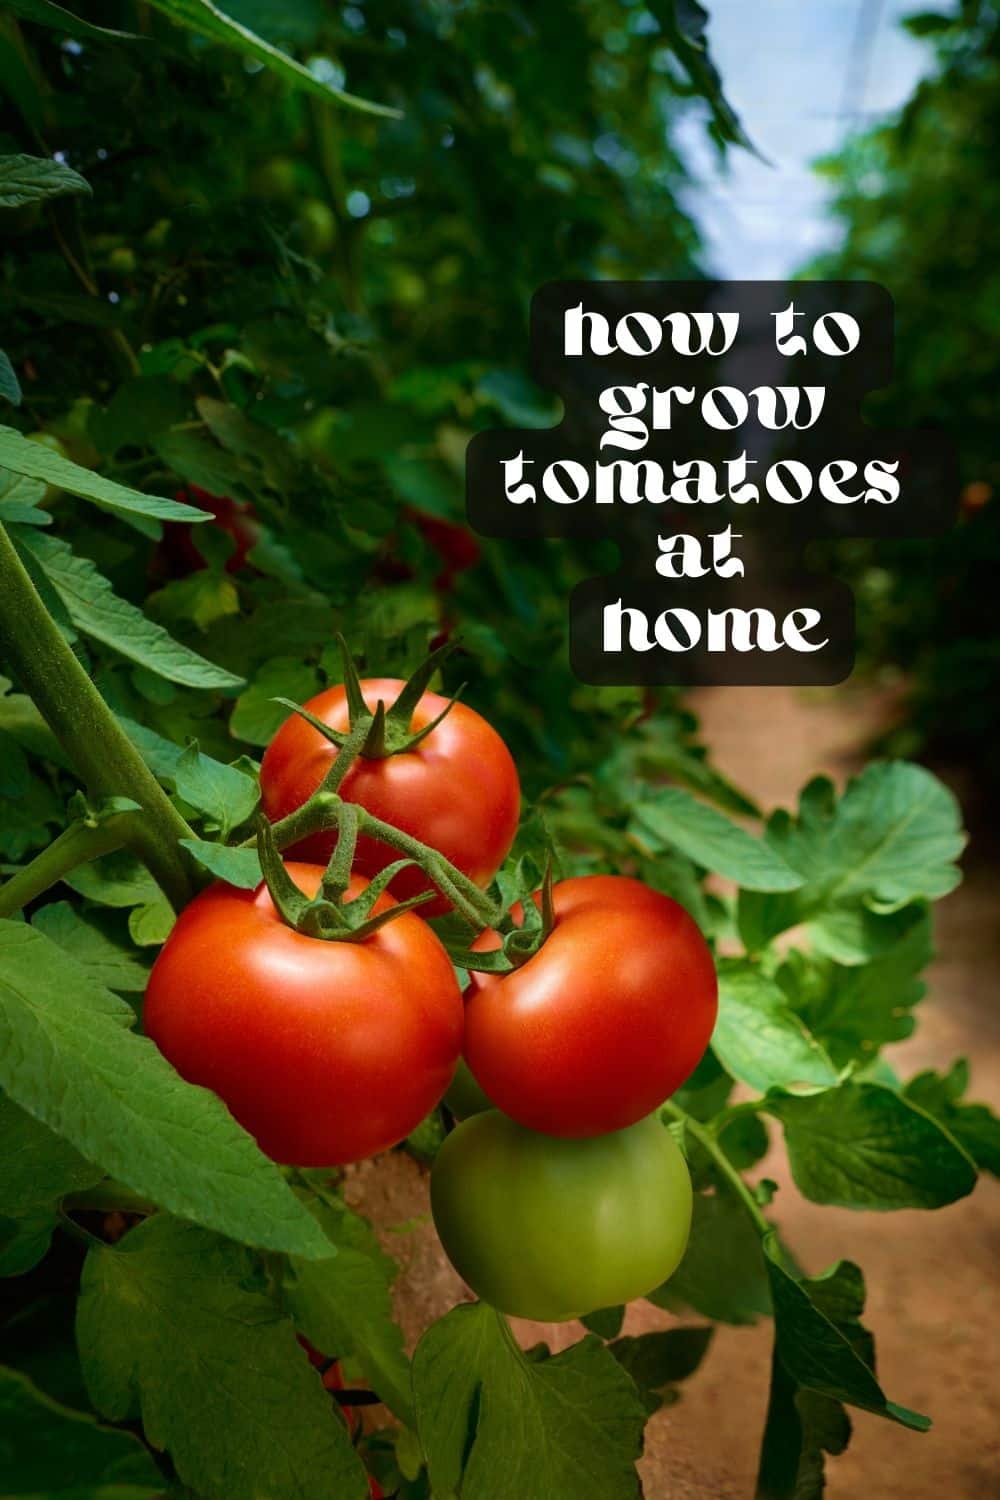 Growing tomatoes at home is super easy and requires little maintenance. All they need is good soil, enough sun, and plenty of water! Anyone can learn how to grow tomatoes, no matter how much gardening experience you have.